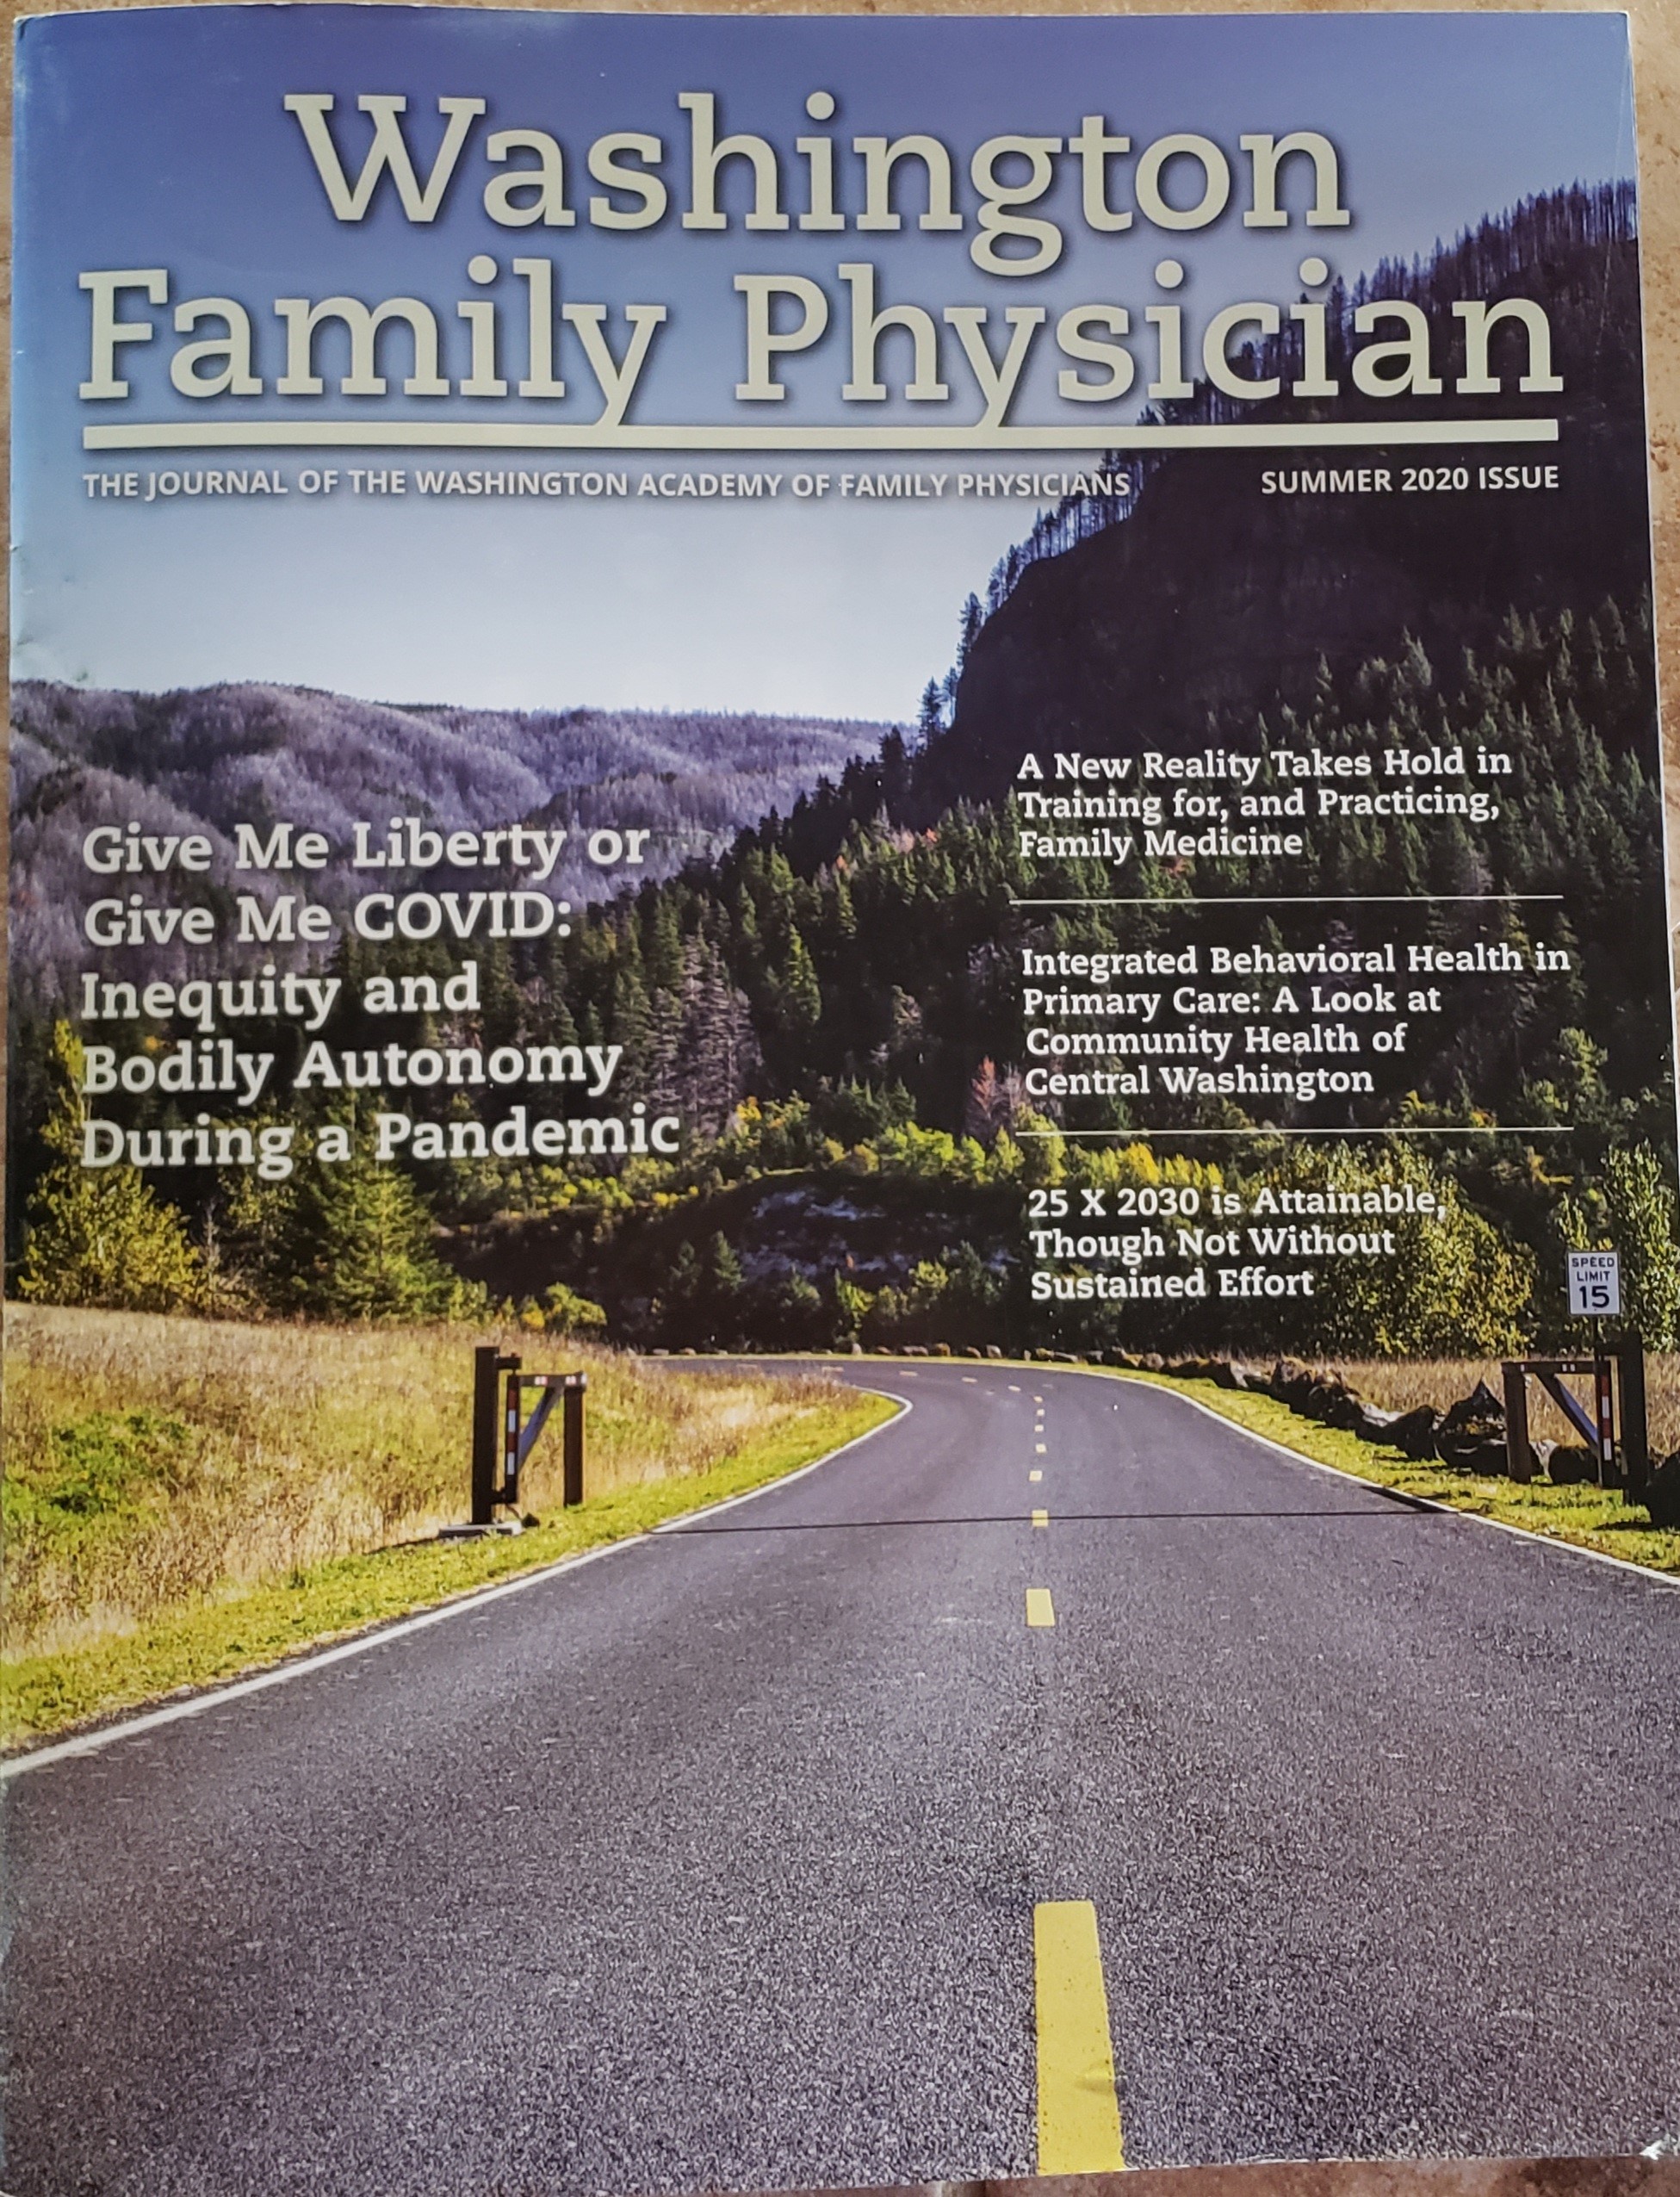 Integrated Behavioral Health Highlight in the Washington Family Physician